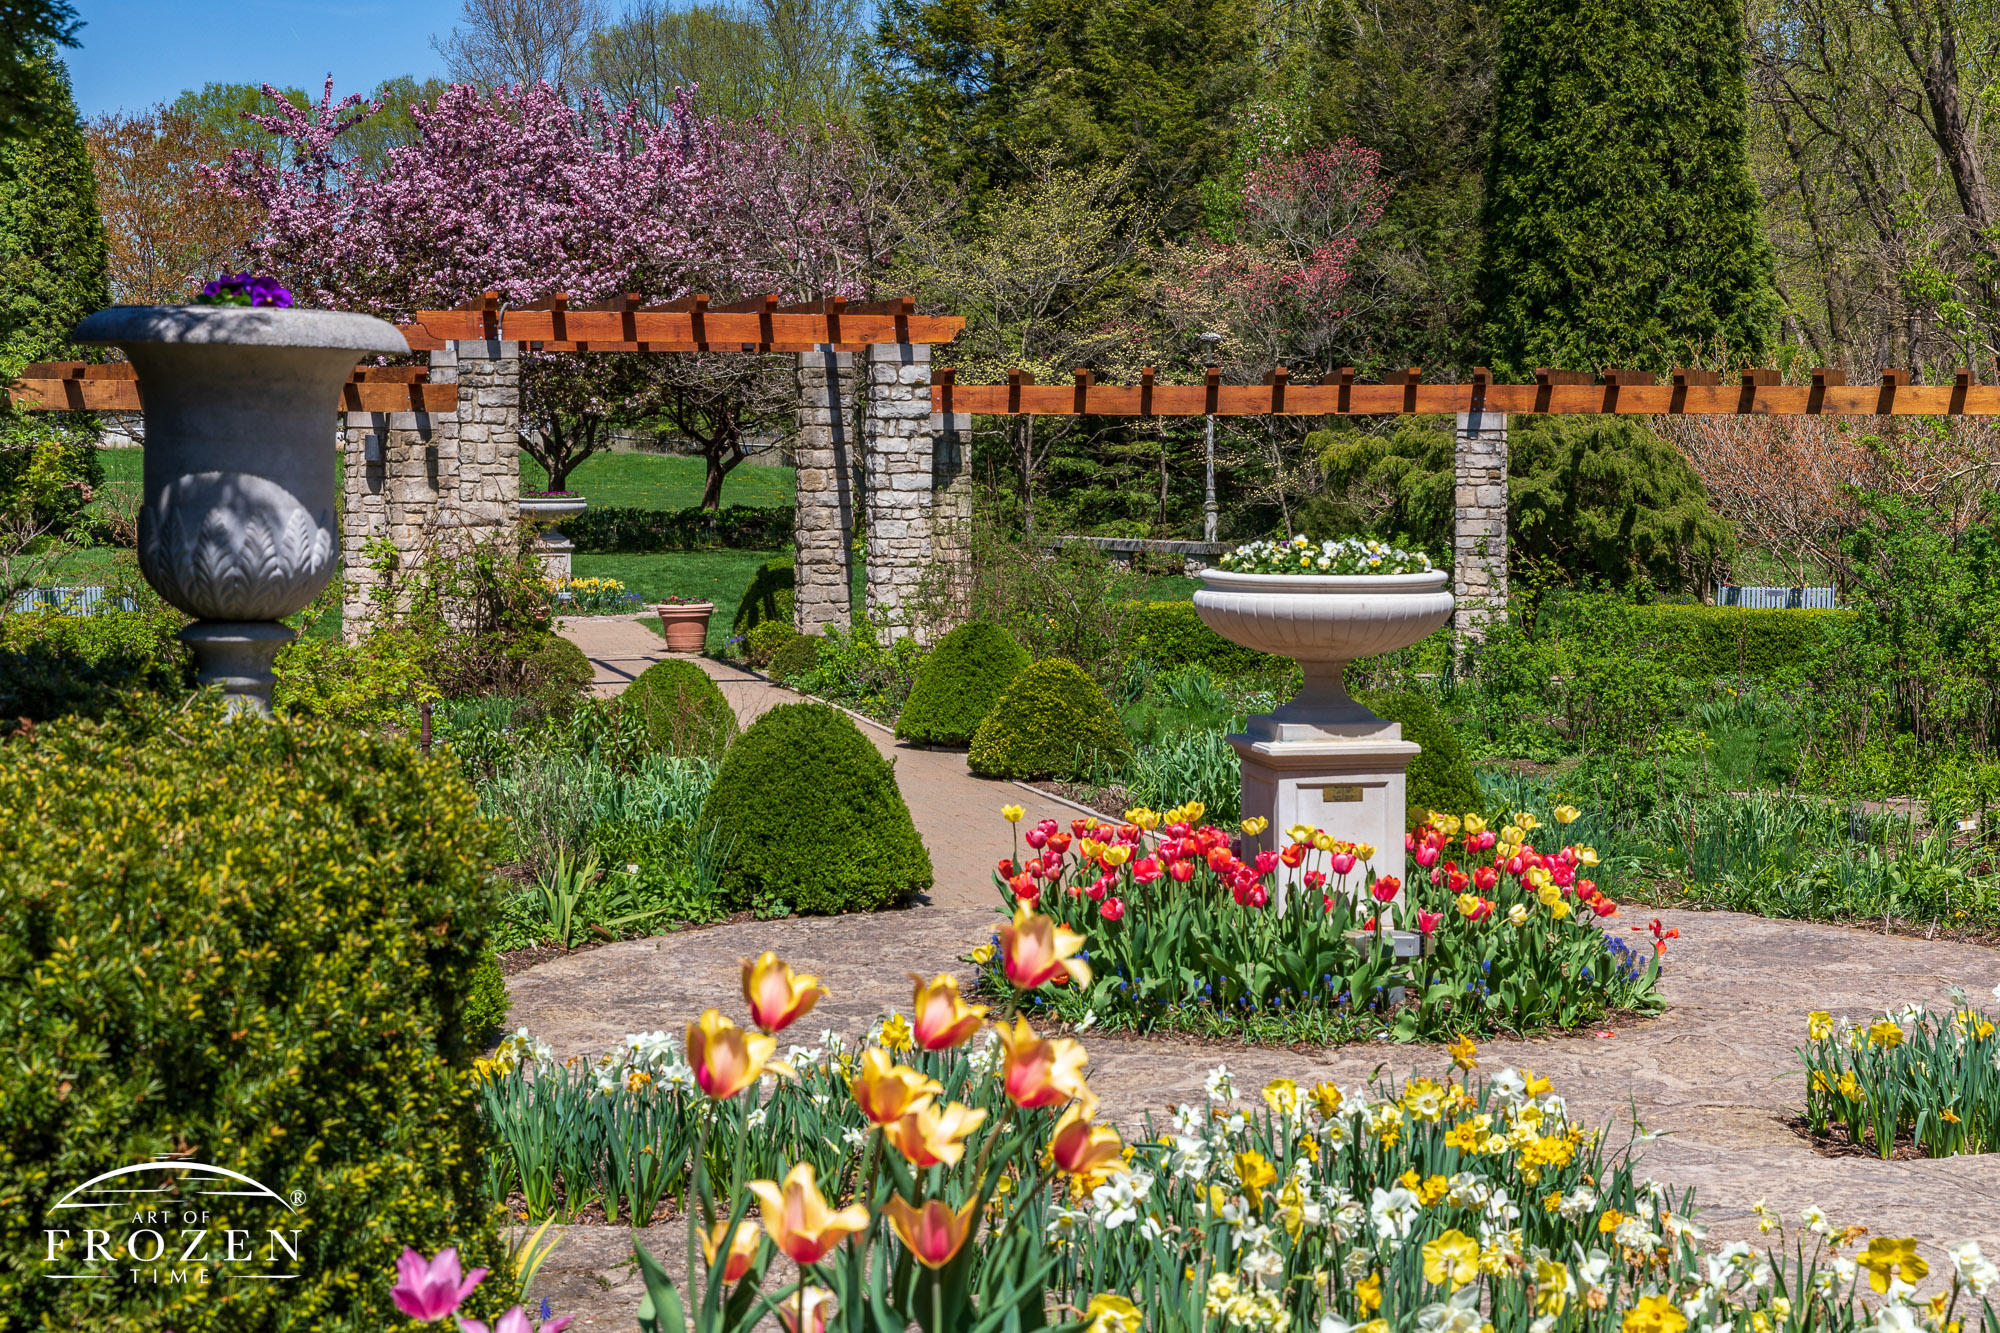 A springtime view of the arbor gardens at Wegerzyn Garden MetroPark where the central path moves through the image at an obloquy angle while surrounded by tulips in the bright sun